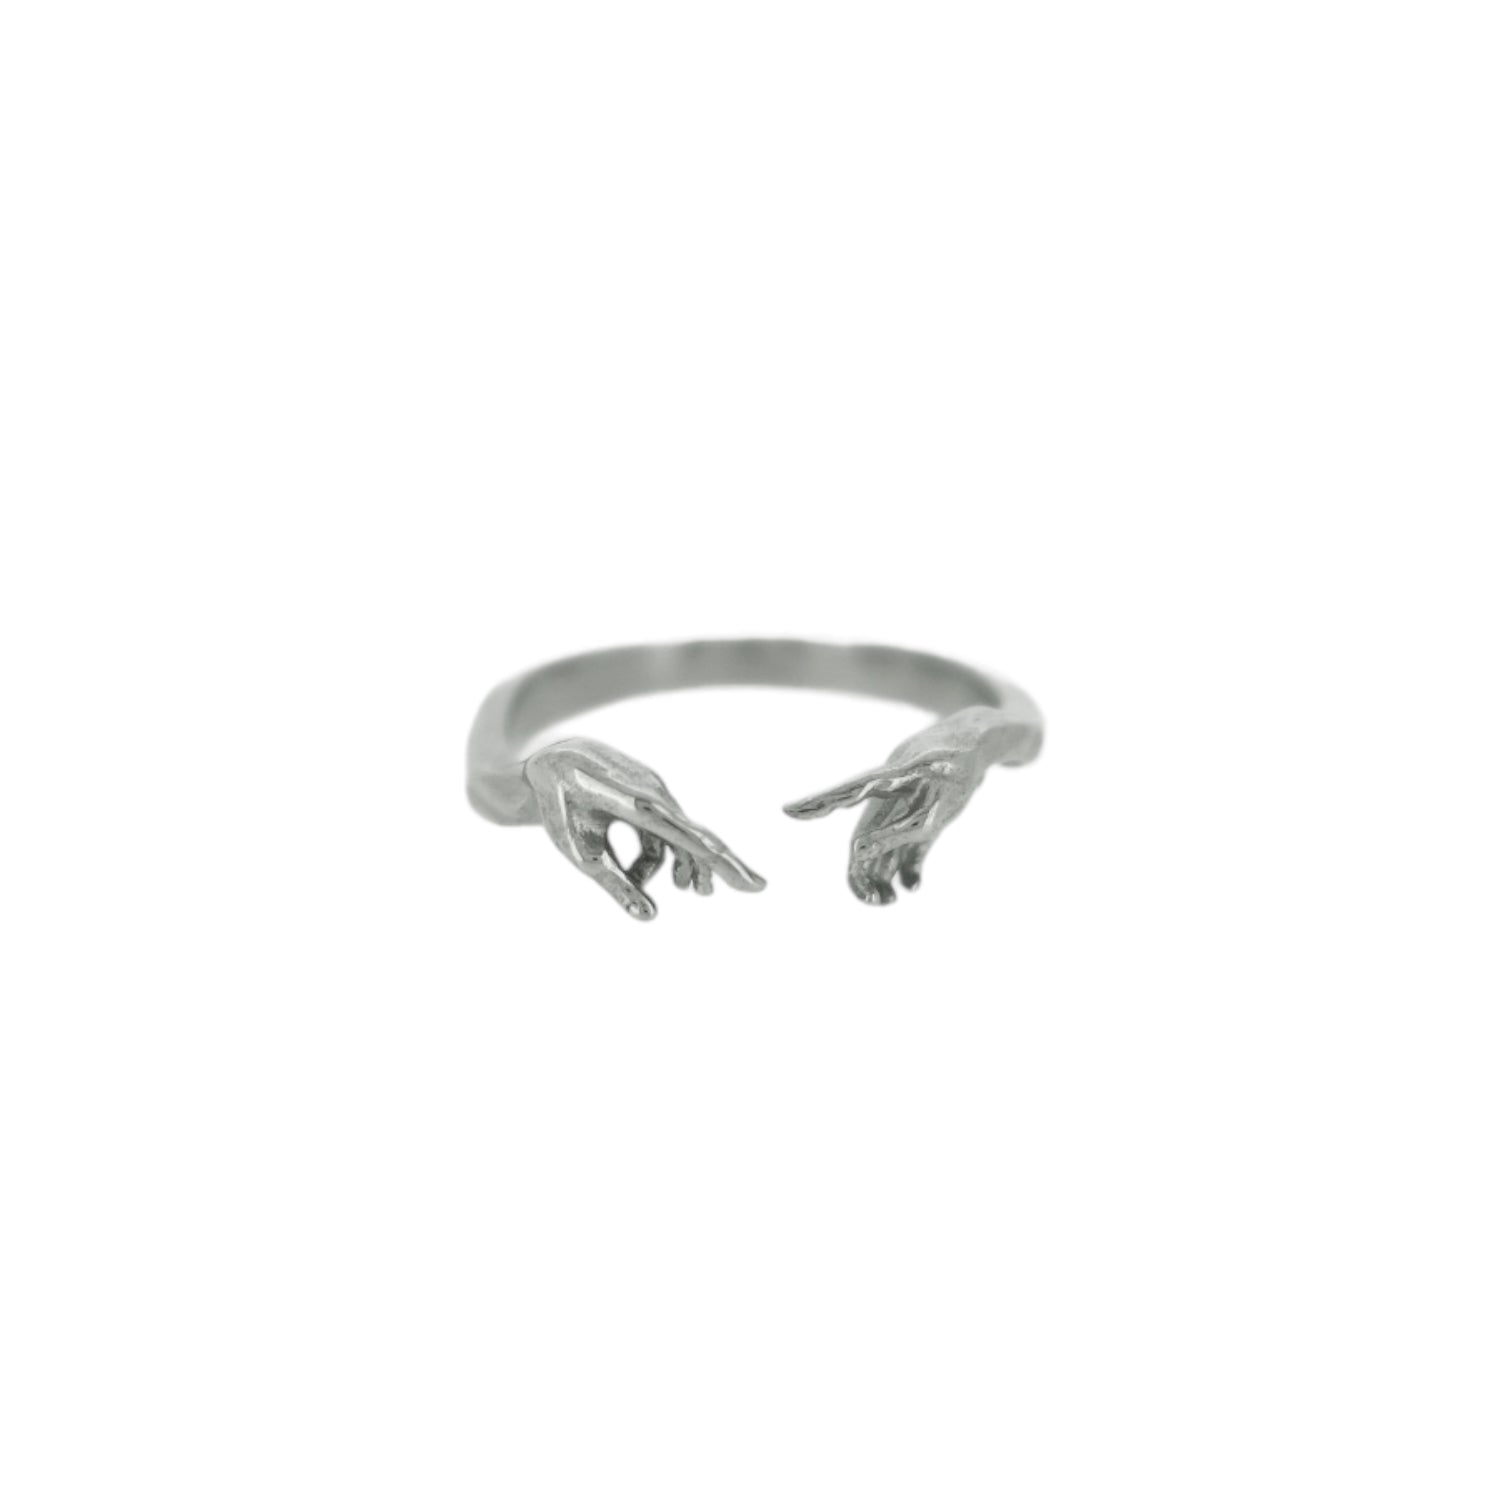 Creation of adam inspired silver band ring for him